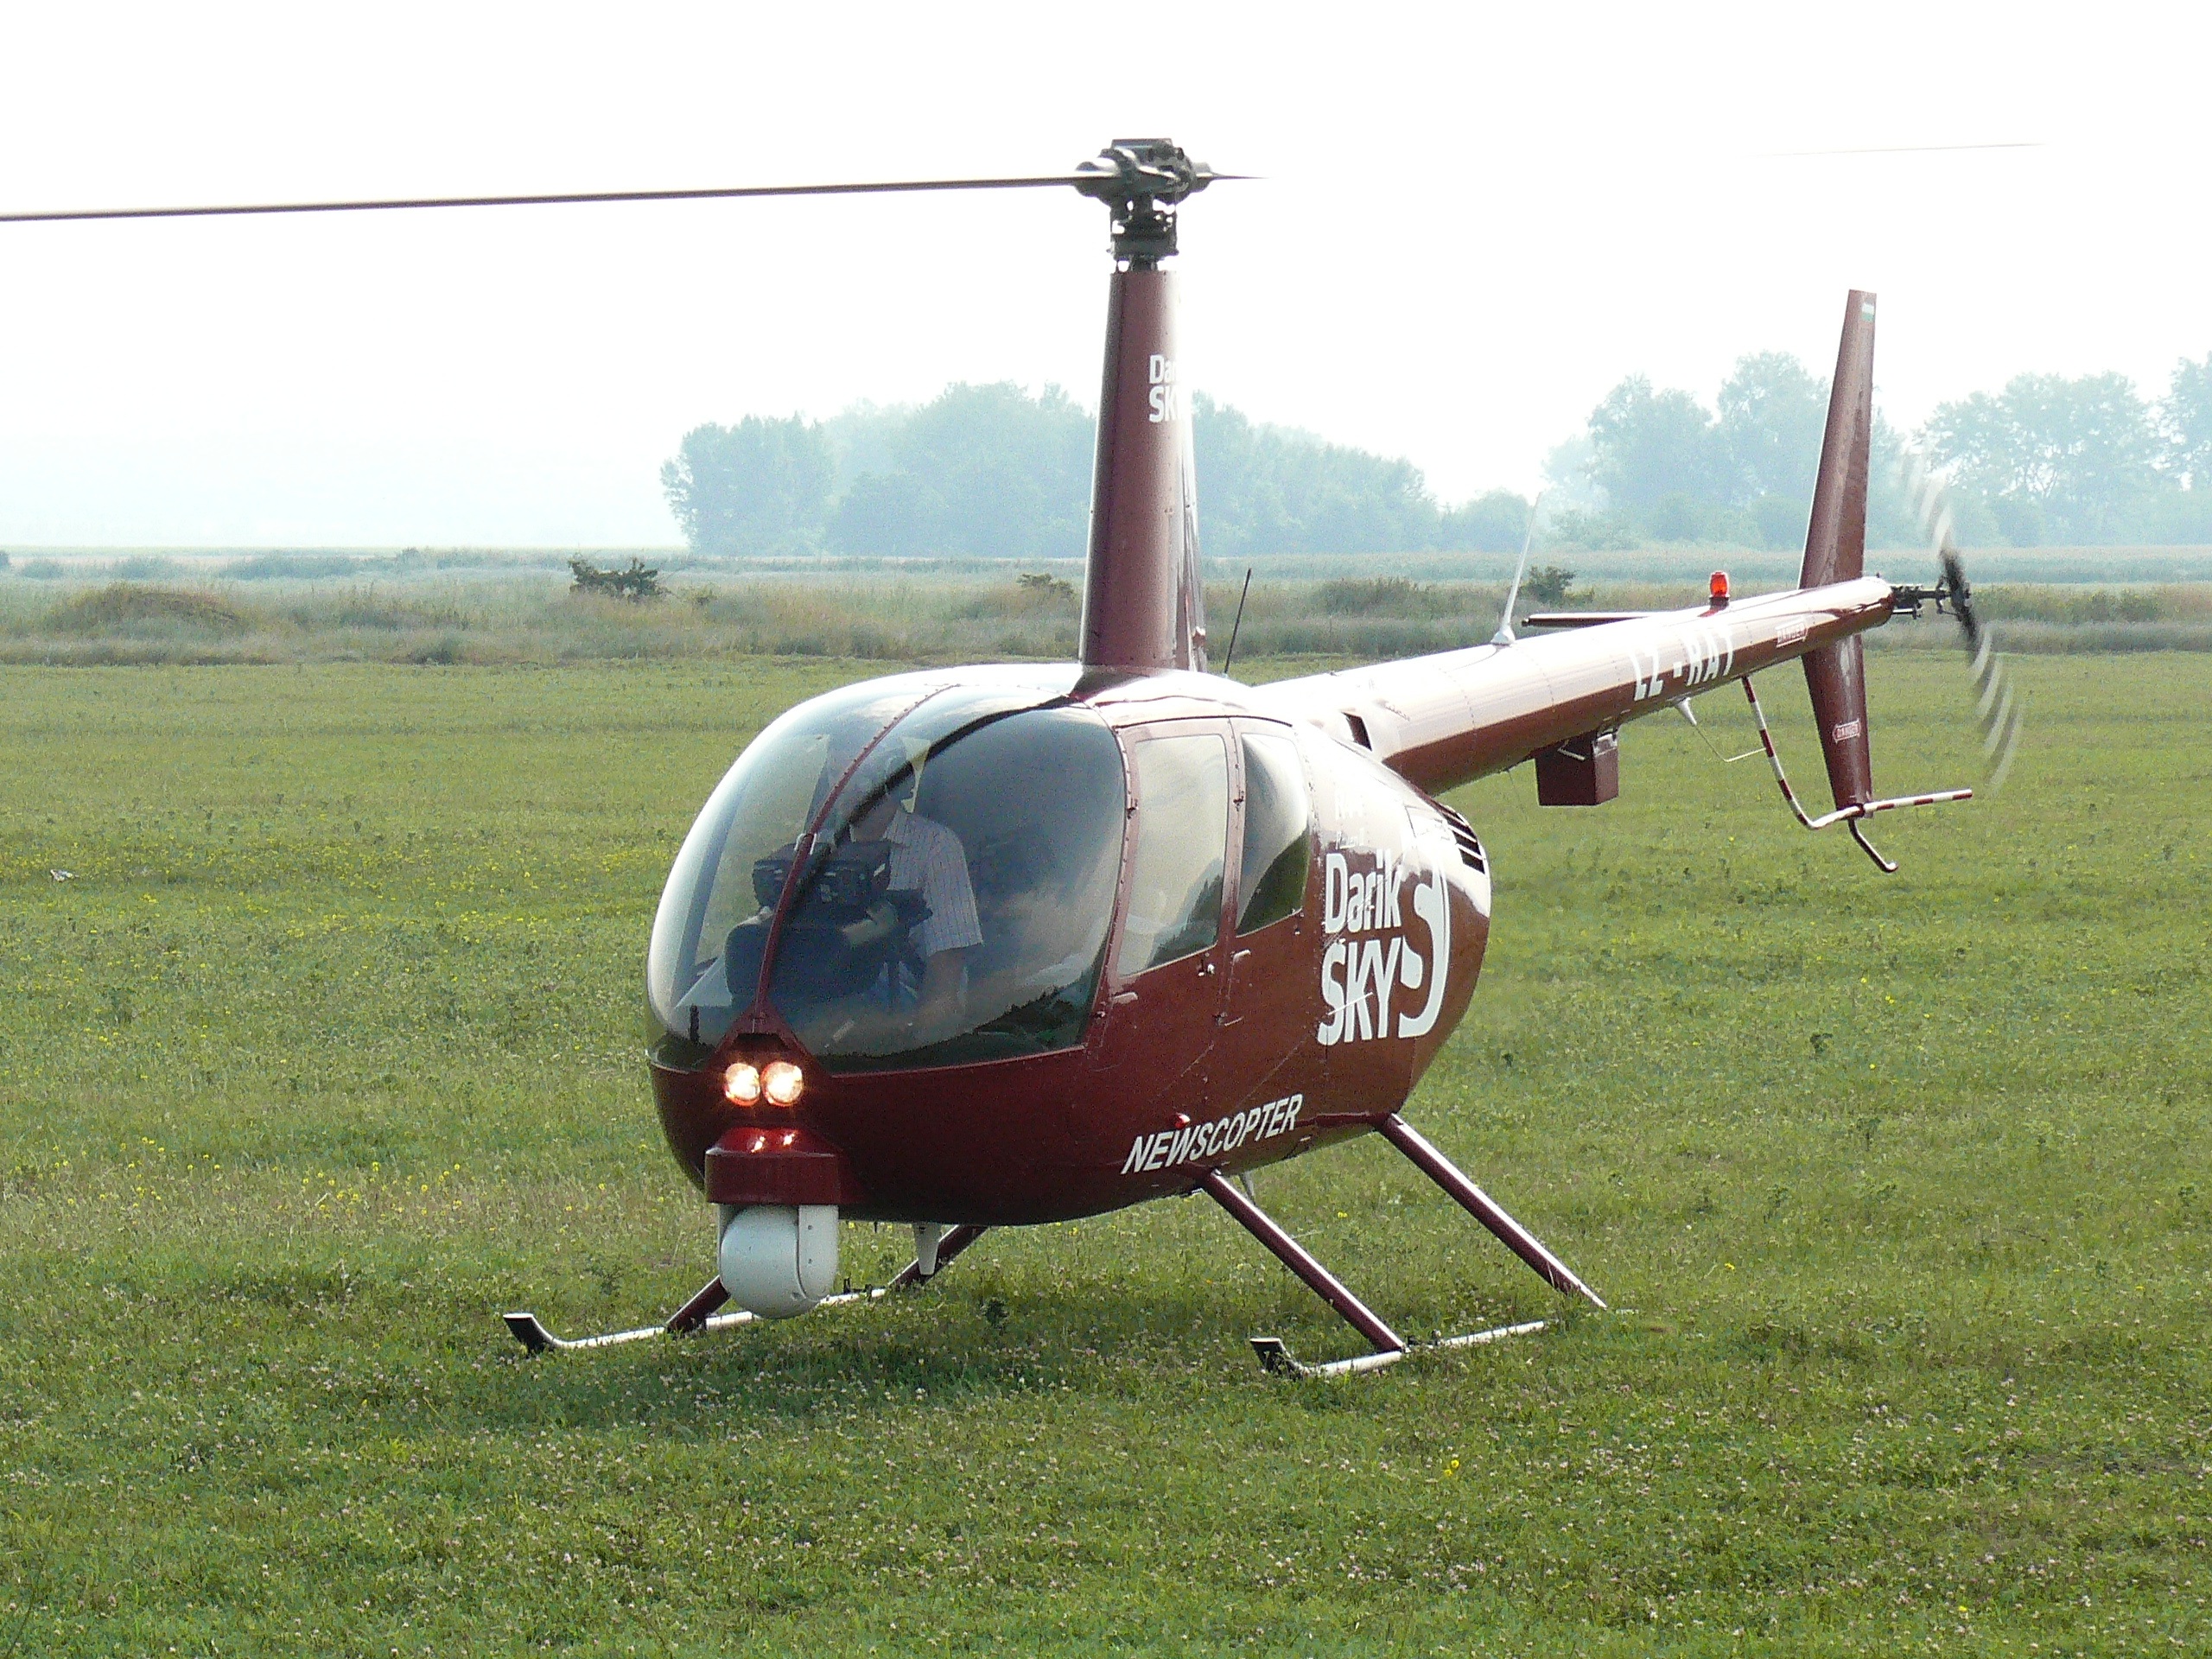 Factors to Evaluate for Optimal Comfort and Convenience during Adventure Travel by Helicopter